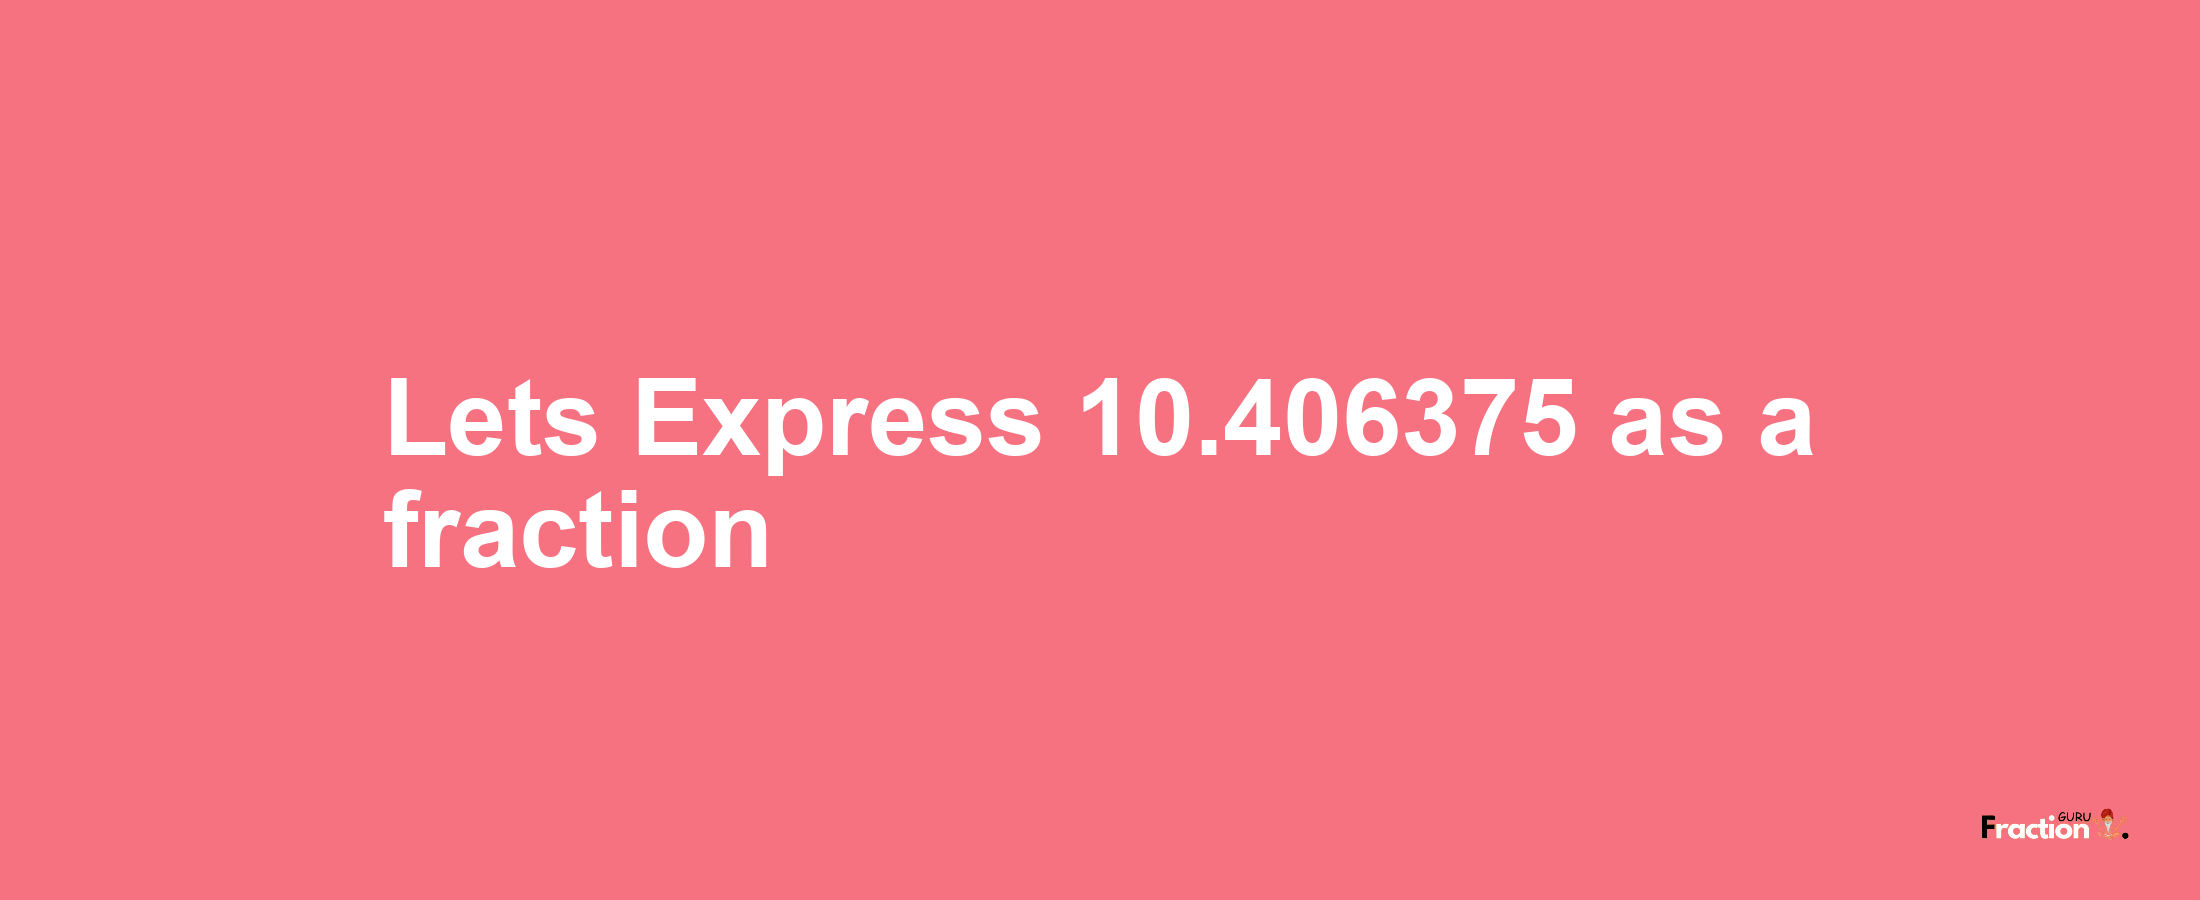 Lets Express 10.406375 as afraction